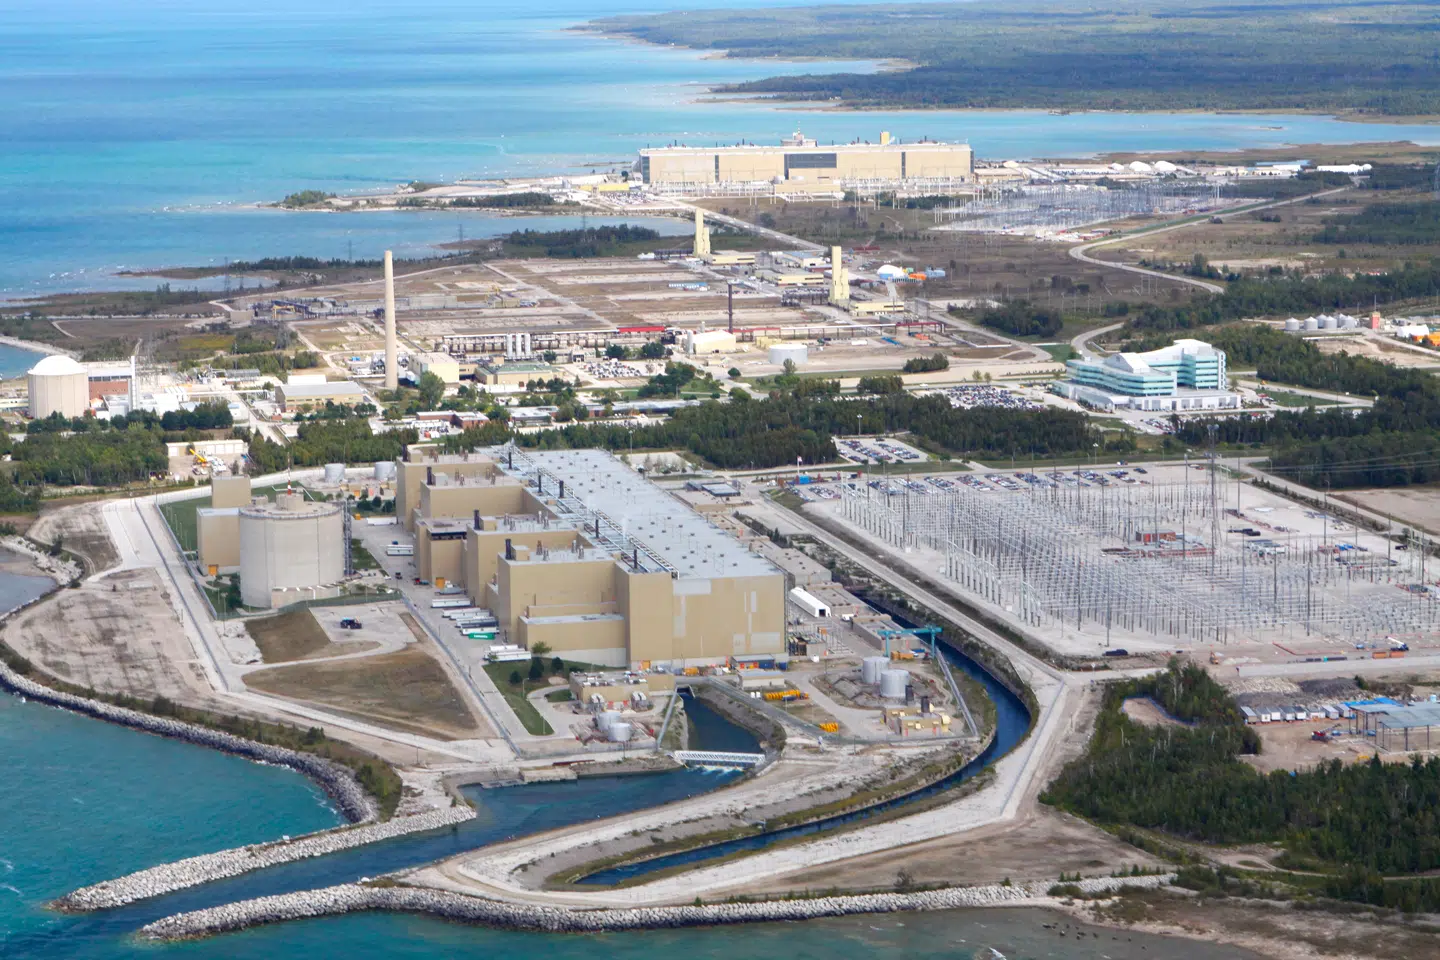 Ipsos Poll Shows Local Support For Bruce Power